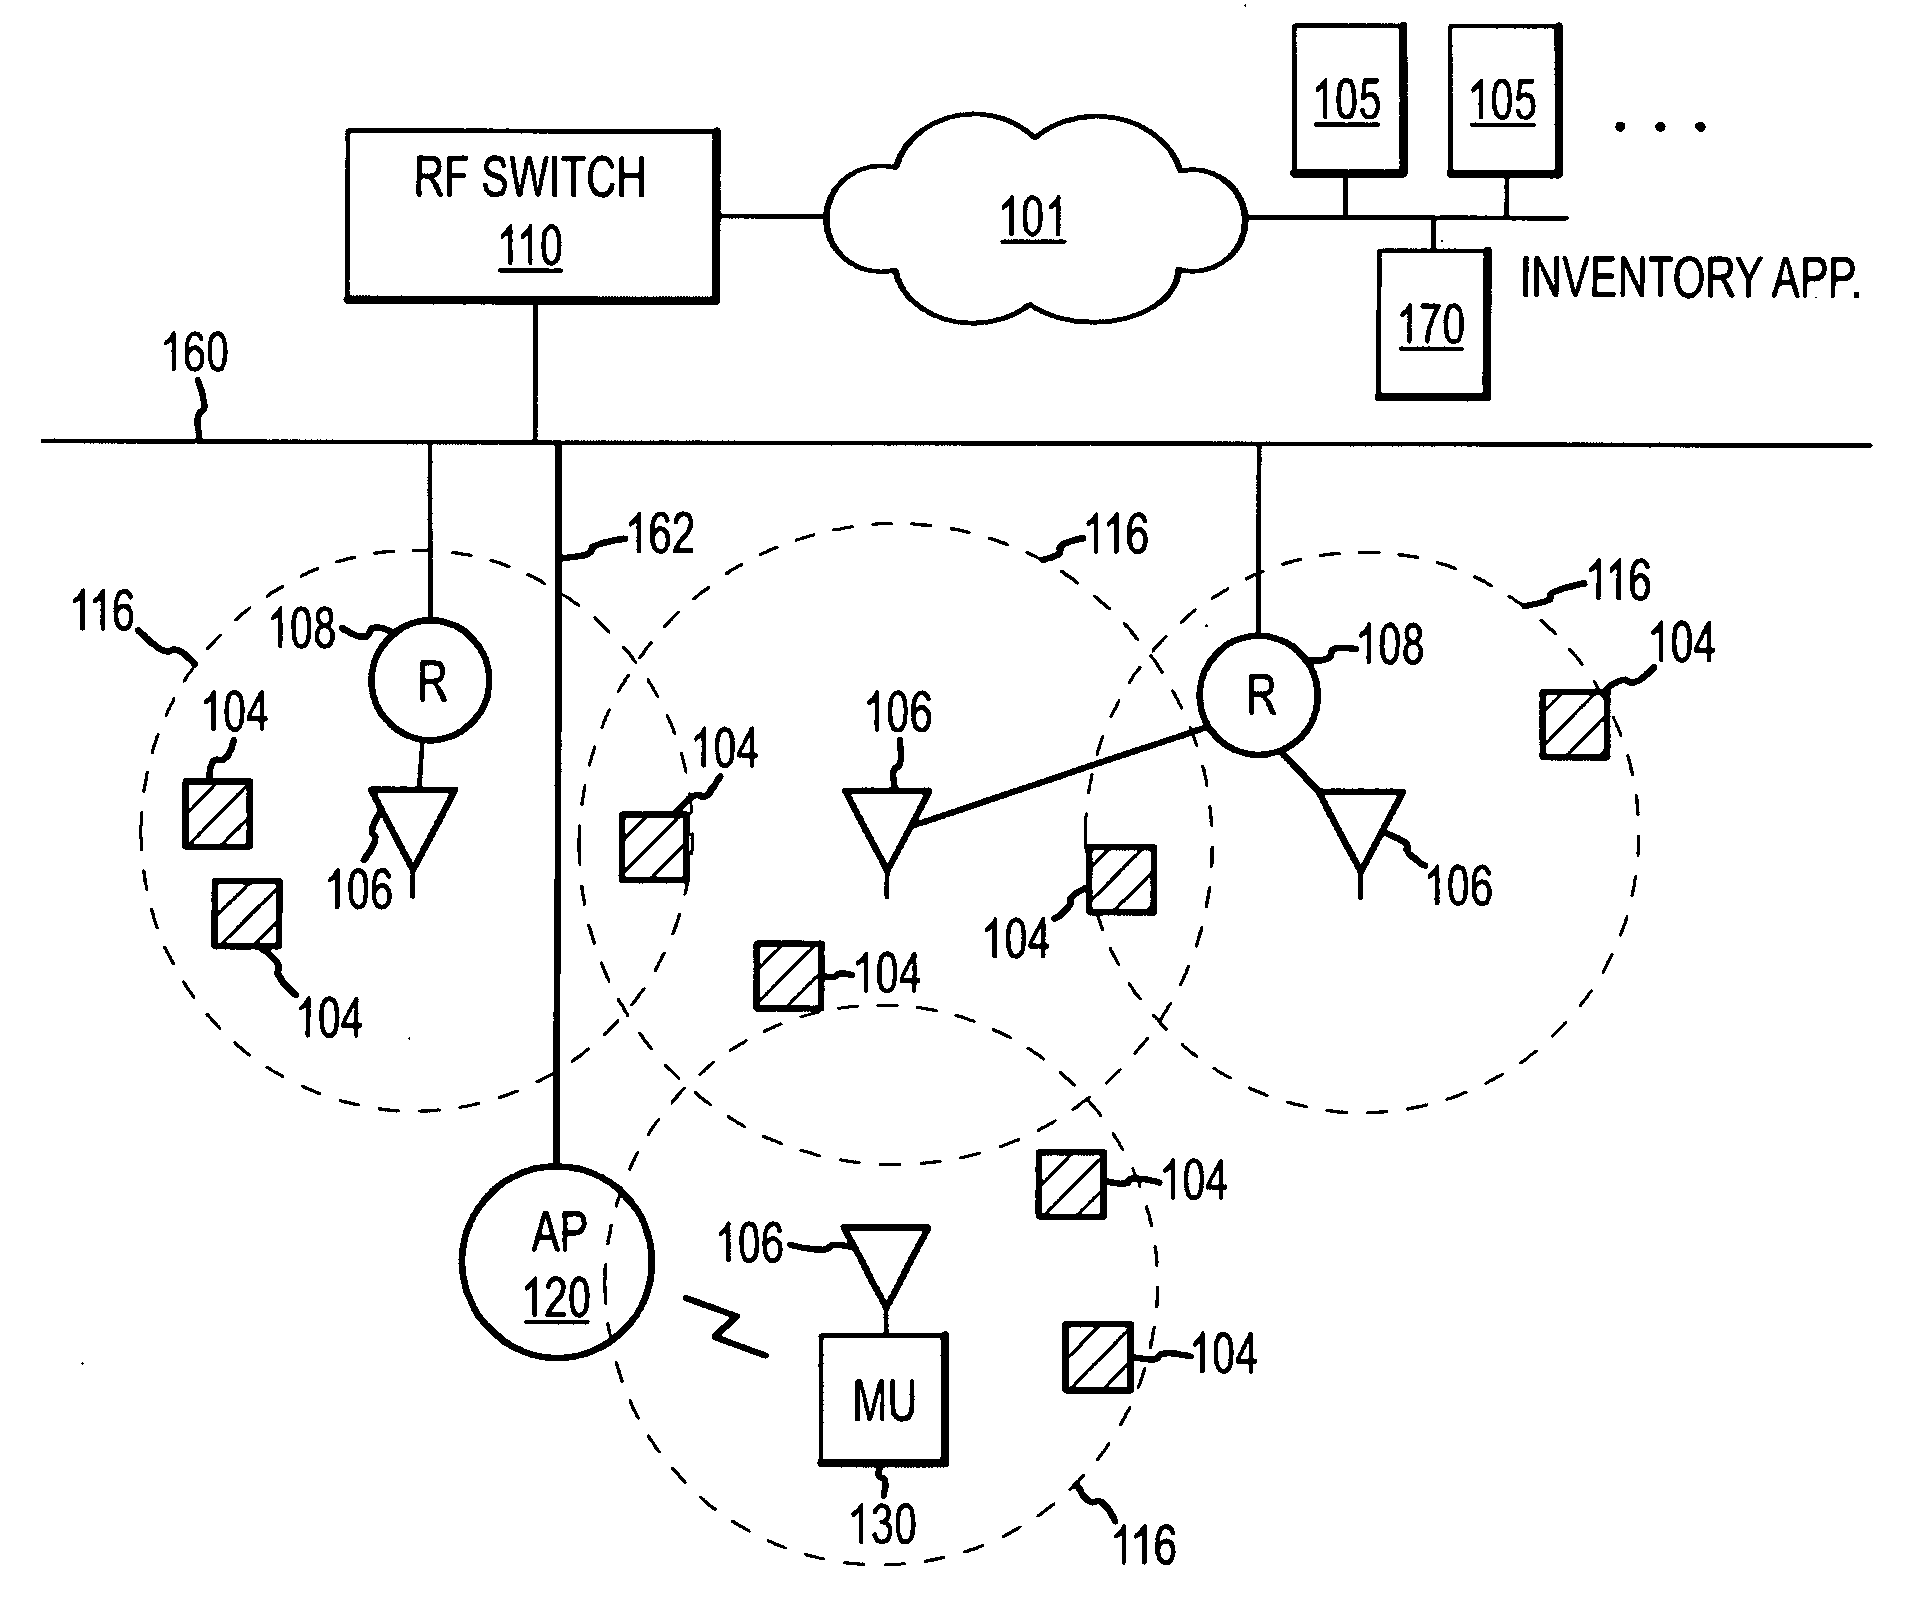 Methods and apparatus for inventory location compliance